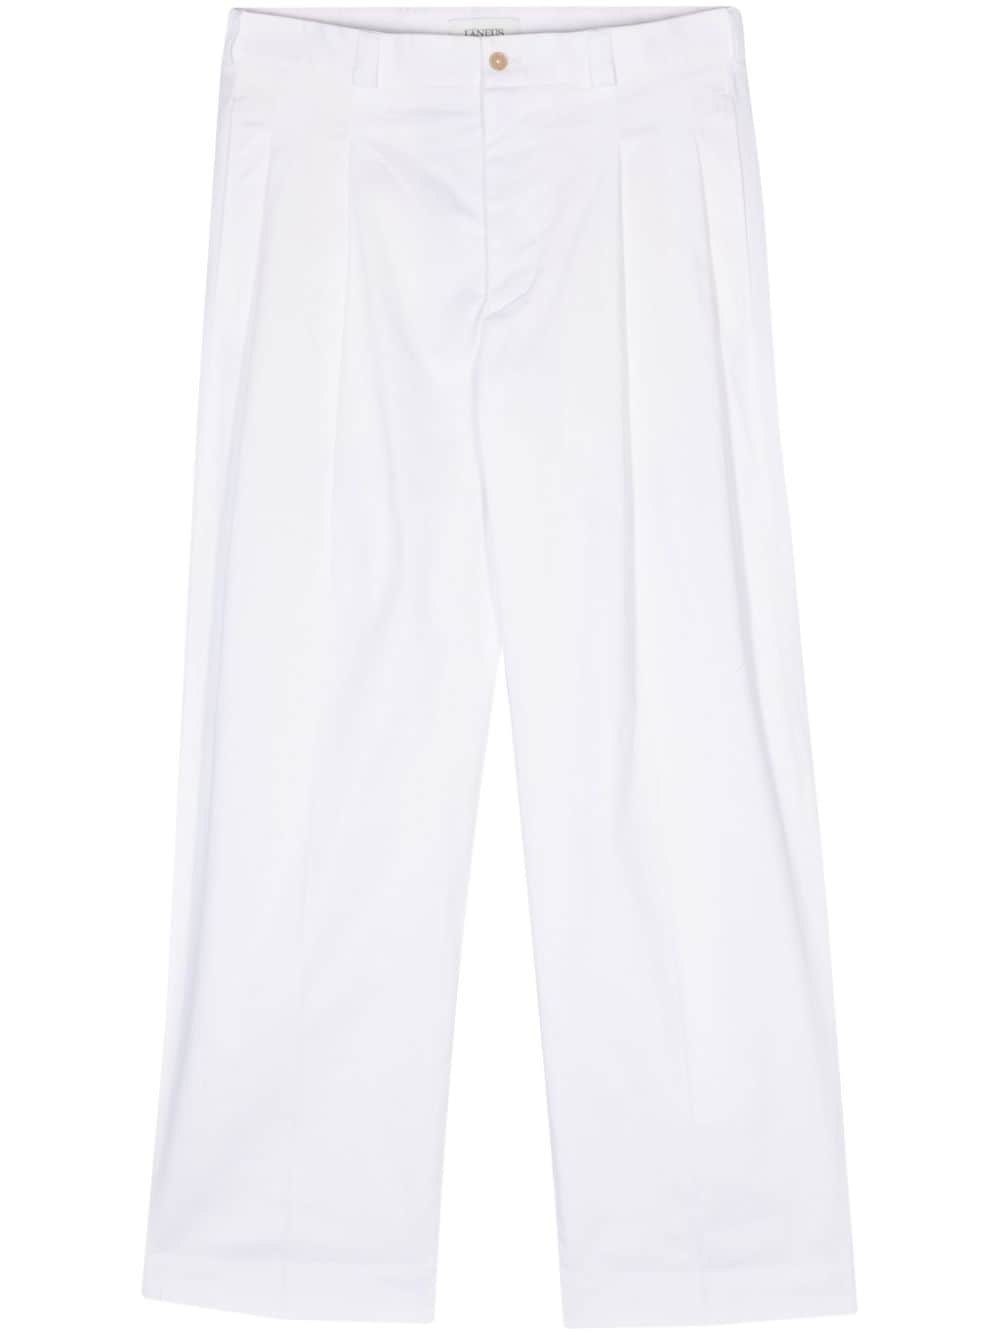 pleat-detailed tailored trousers